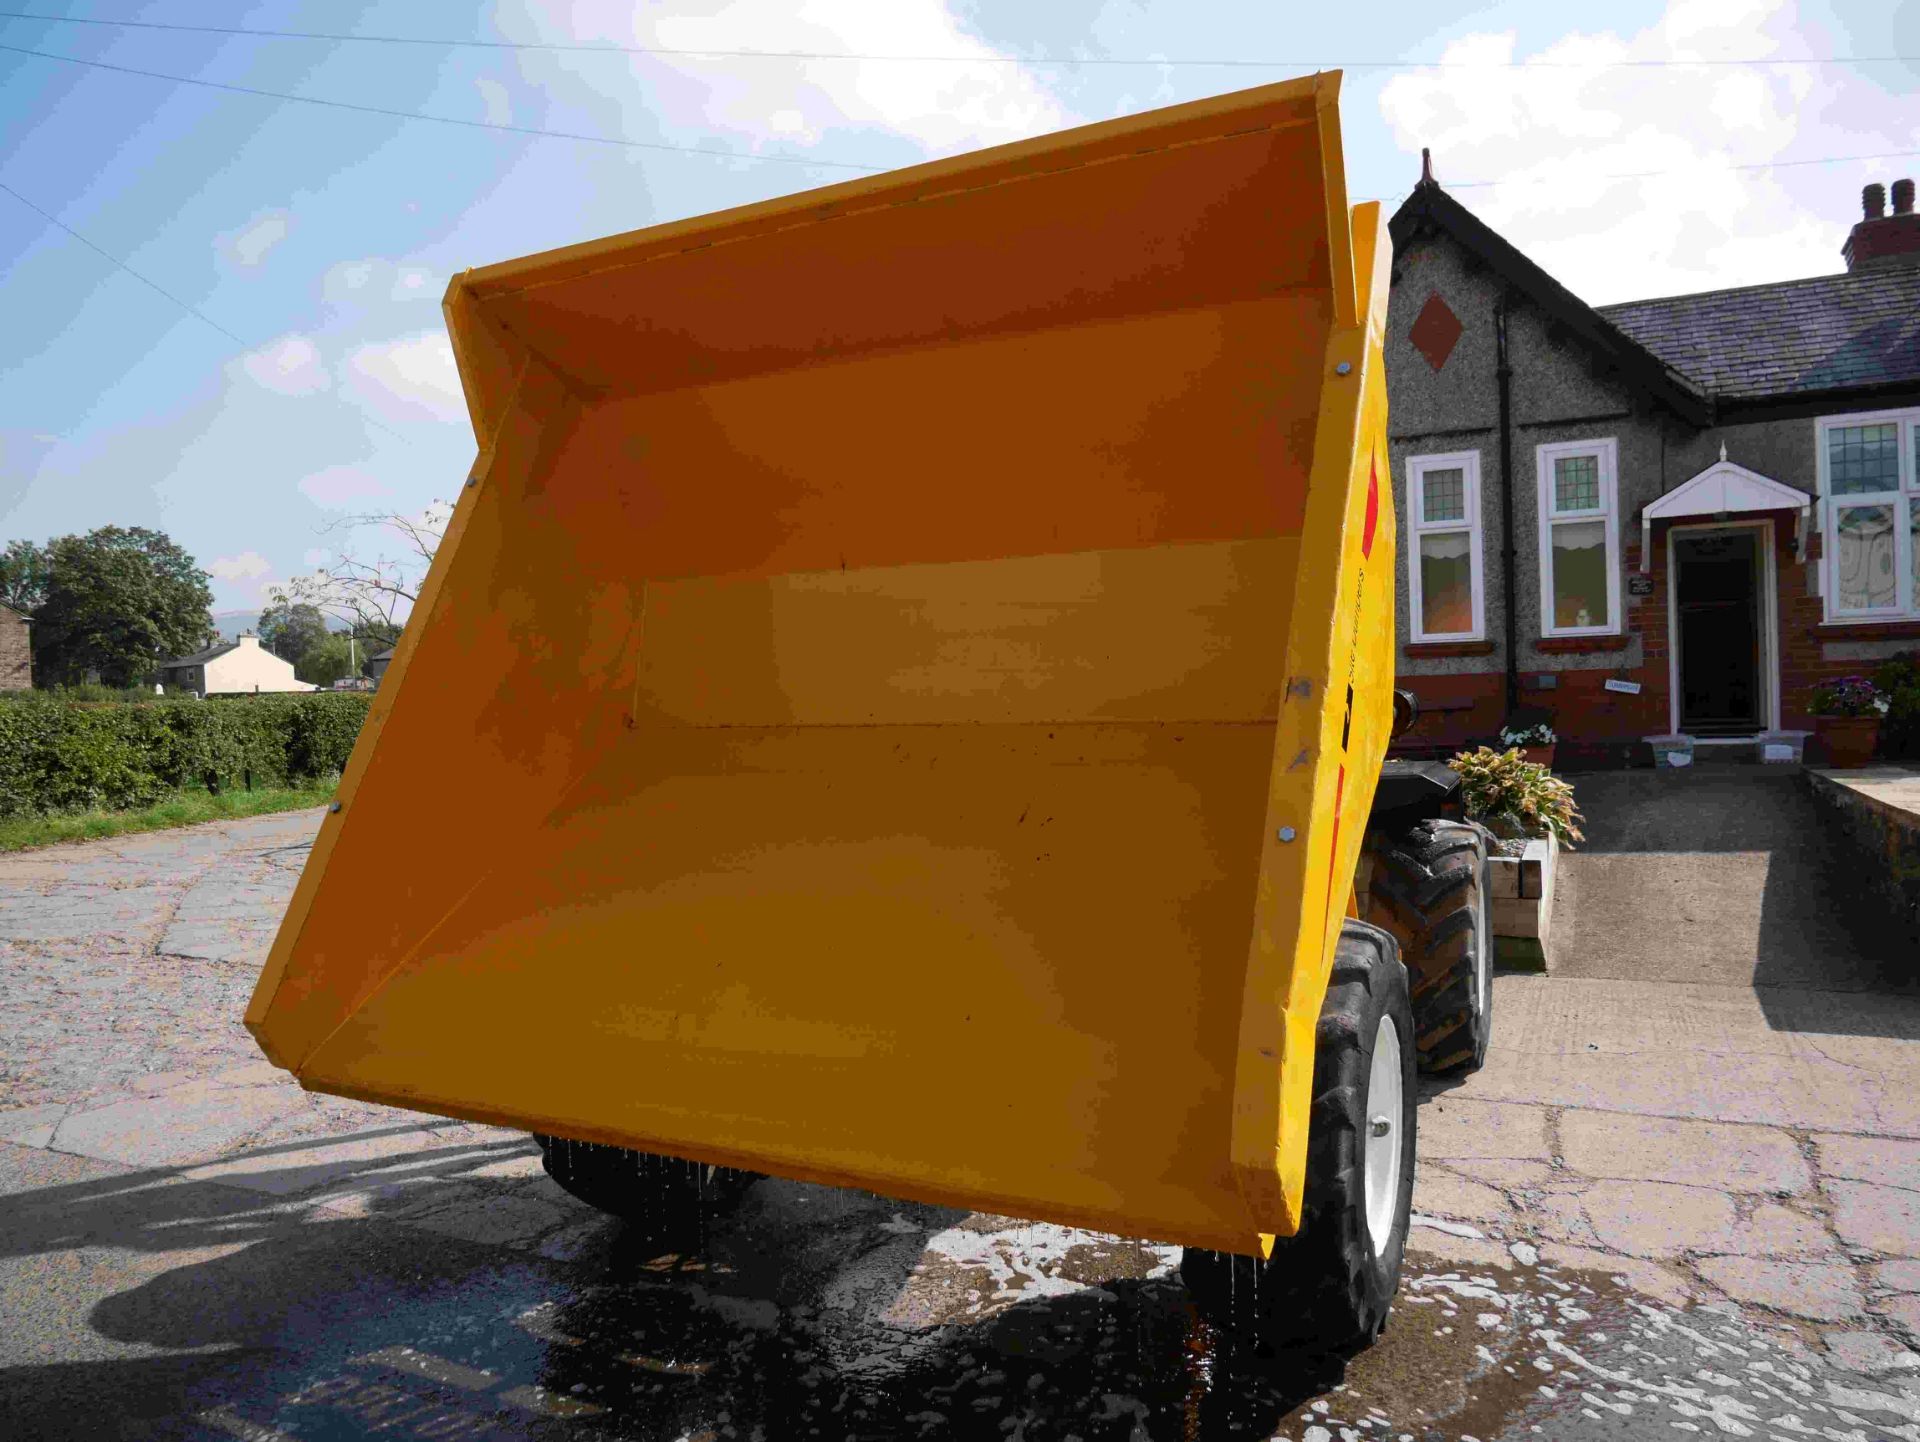 Barford SX7000 DUMPER, year of manufacture 2004, 3174 indicated hours (at time of listing), - Image 4 of 4